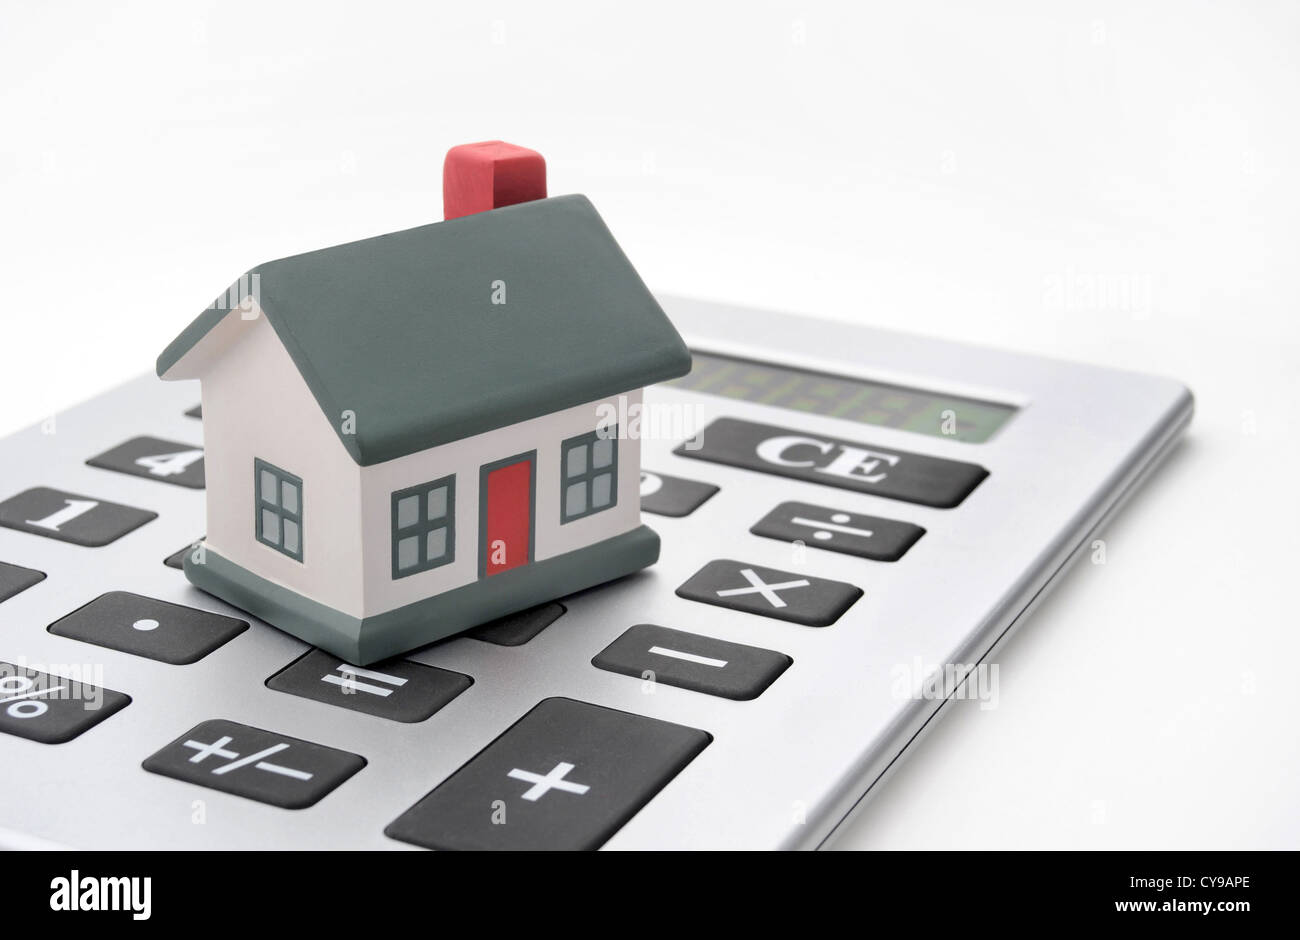 HOUSE ON CALCULATOR RE HOUSEHOLD BILLS COSTS MORTGAGES PRICES RISING HOUSING BUDGETS INCOMES WAGES FIRST TIME BUYERS LIVING UK Stock Photo